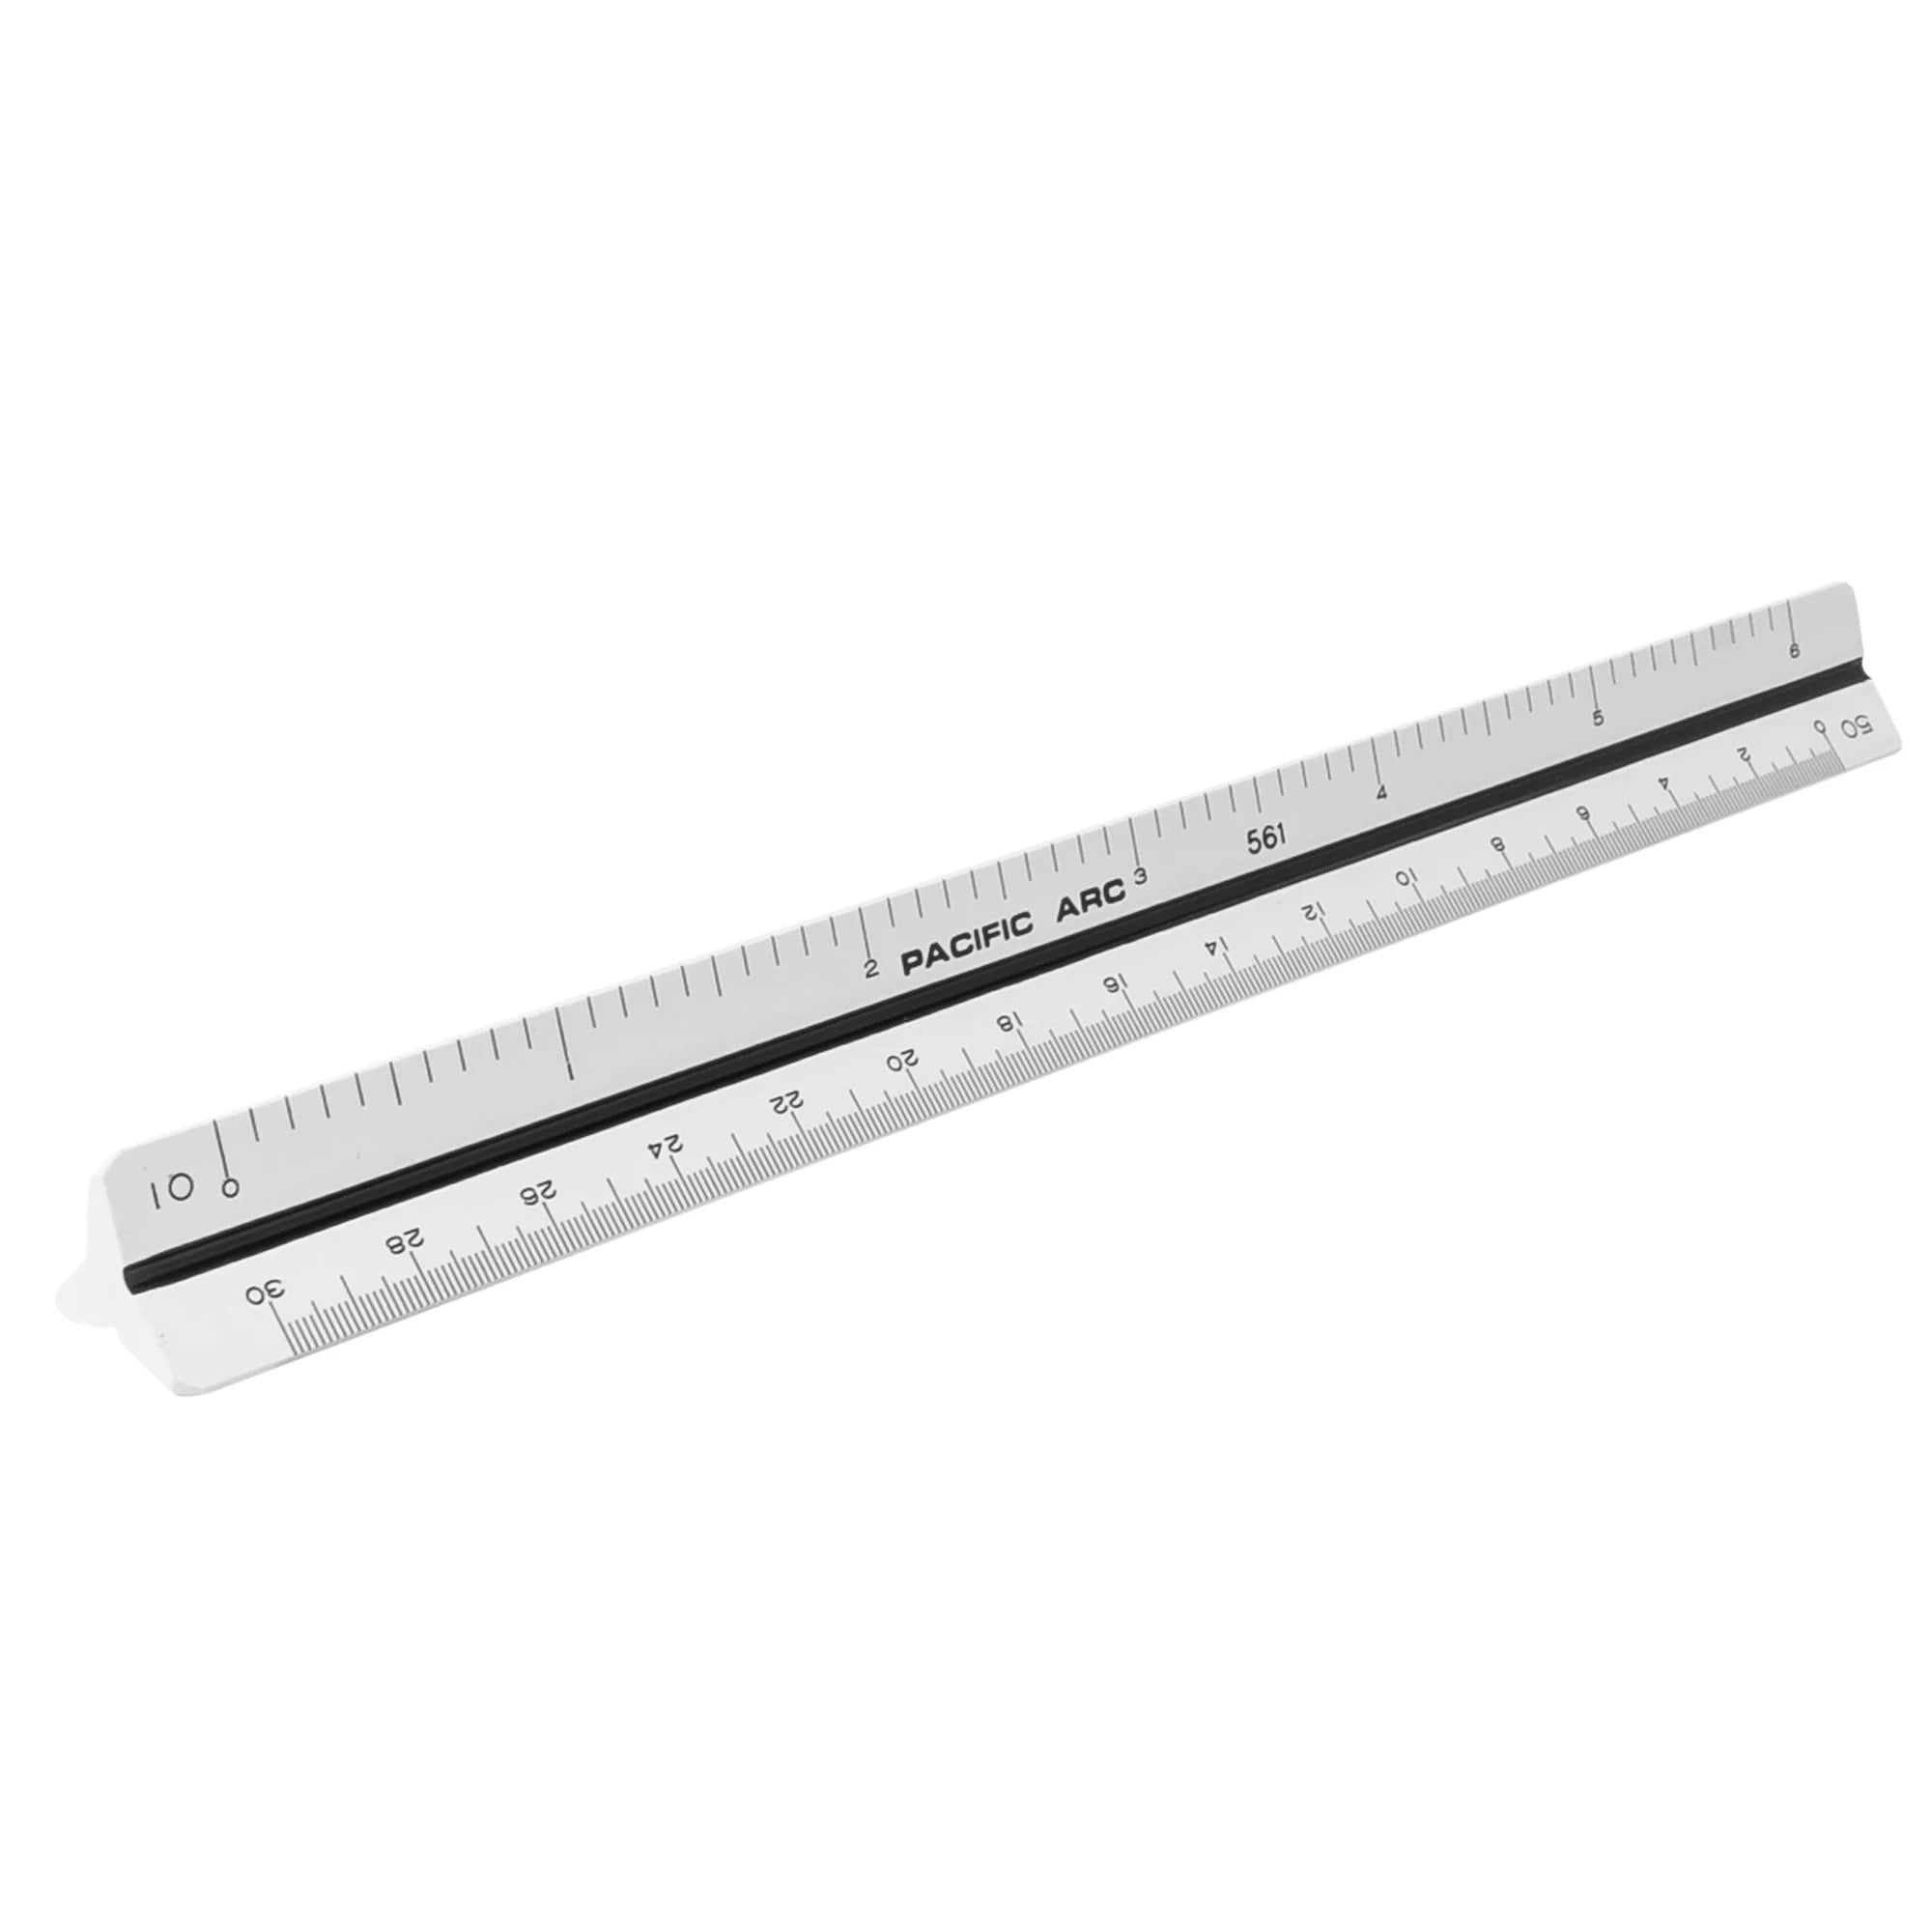 Pacific Arc, Architect Color Coded Scale Ruler, Divided by: 1/16th inch,  3/32 inch, 1/8 inch, 3/16 inch, 1/4 inch, 3/8 inch, 1/2 inch, 3/4 inch, 1  inch, 1-1/2 inch, 3 inch scale degrees. 12 inch 